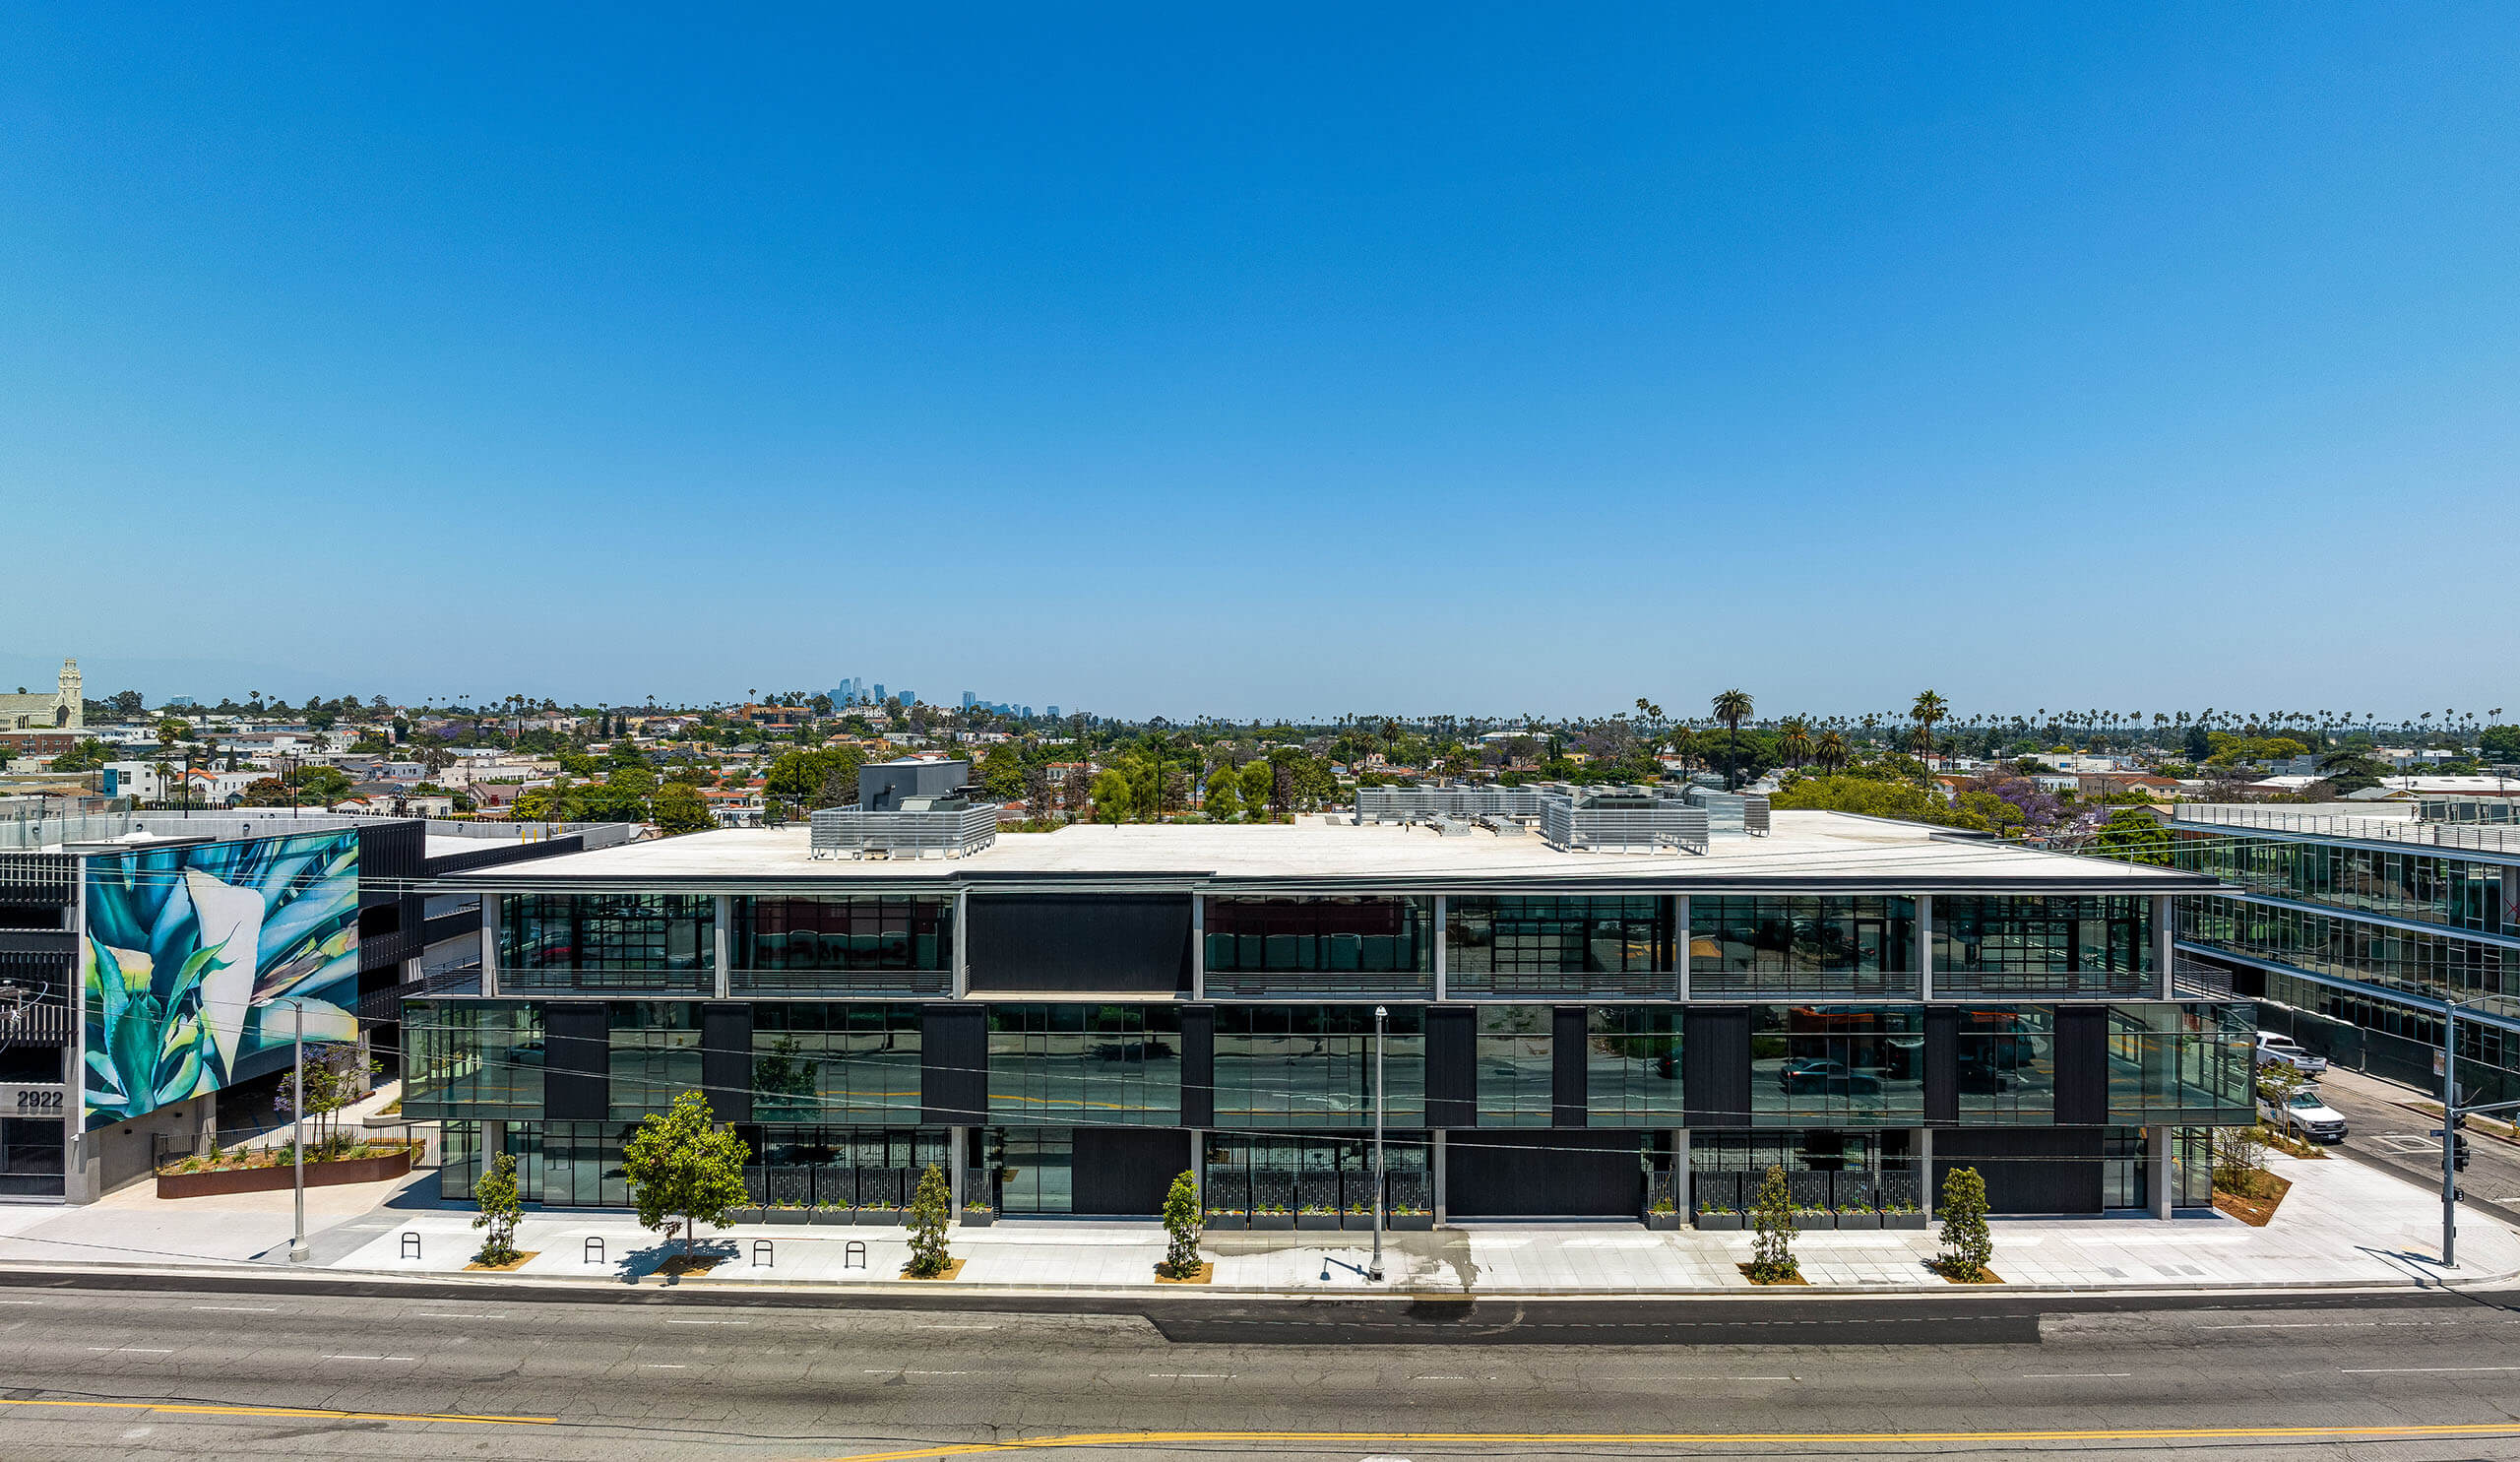 2922 Crenshaw - Aerial view of front of building